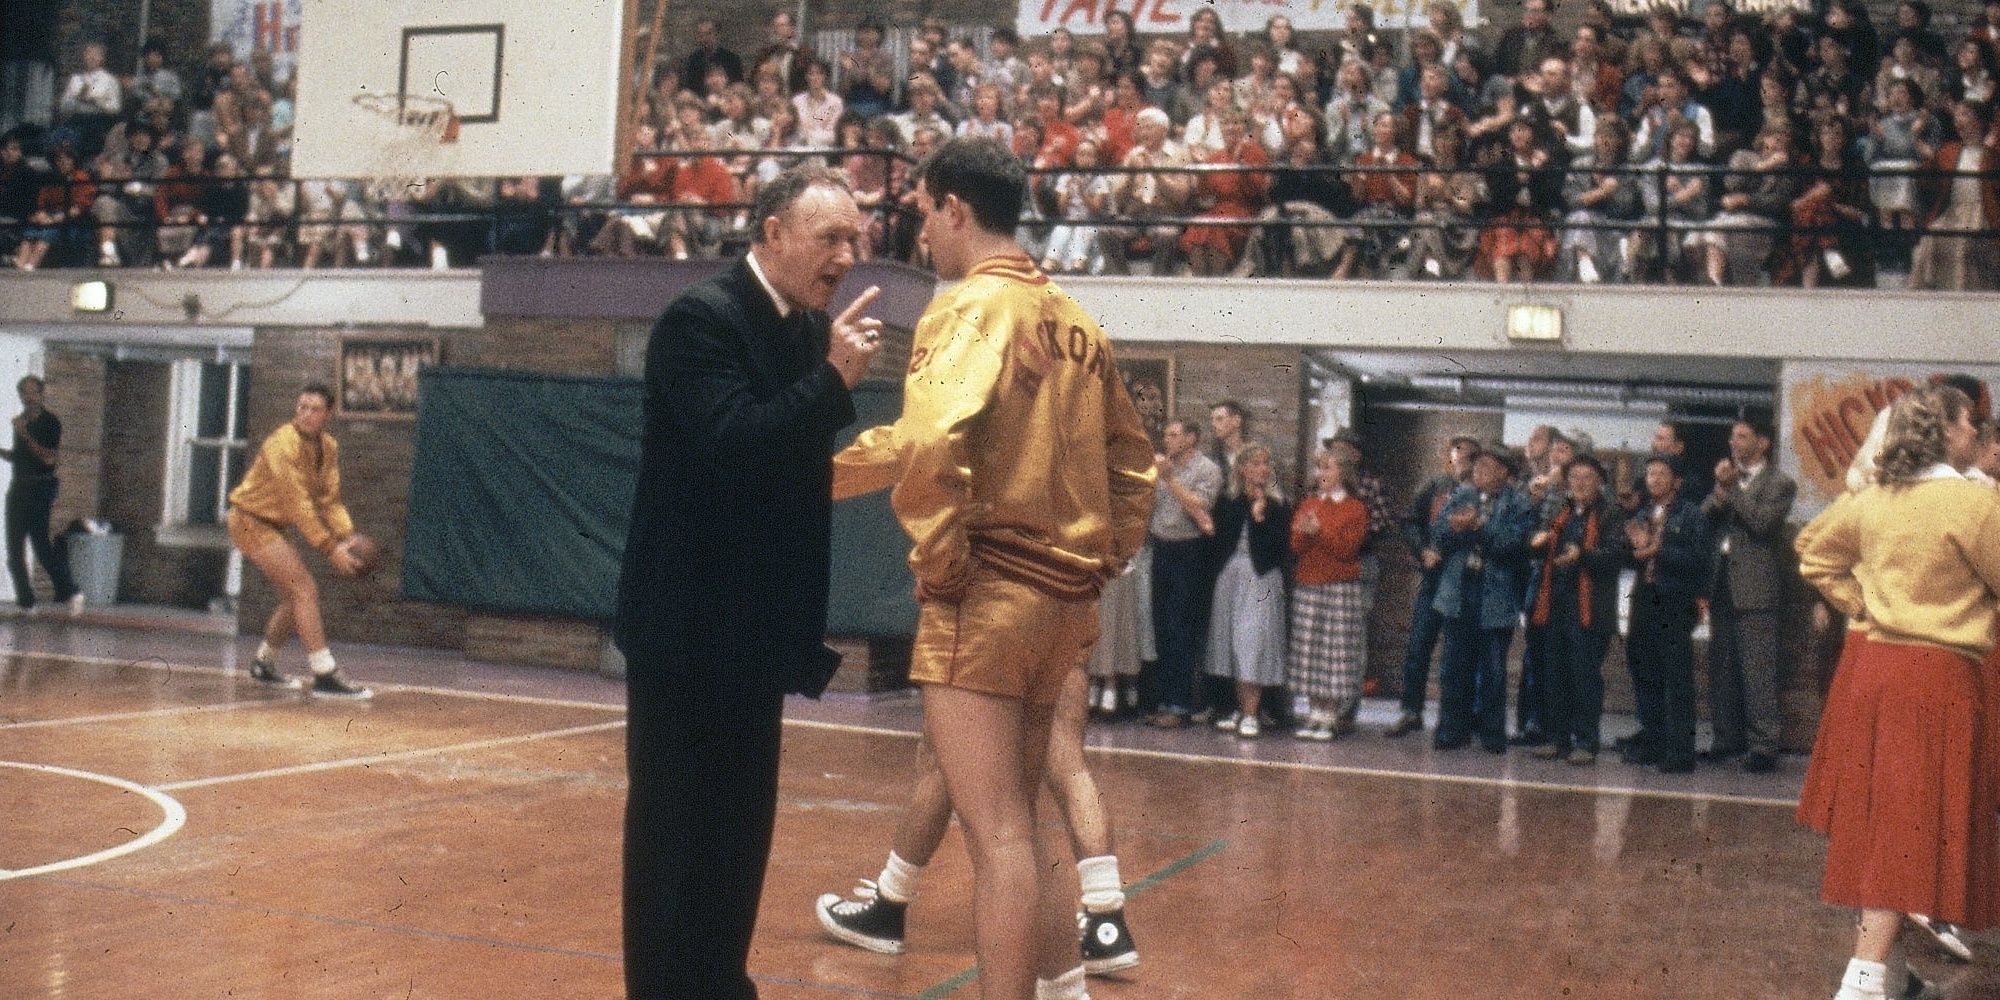 A coach pointing at a basketball player in Hoosiers